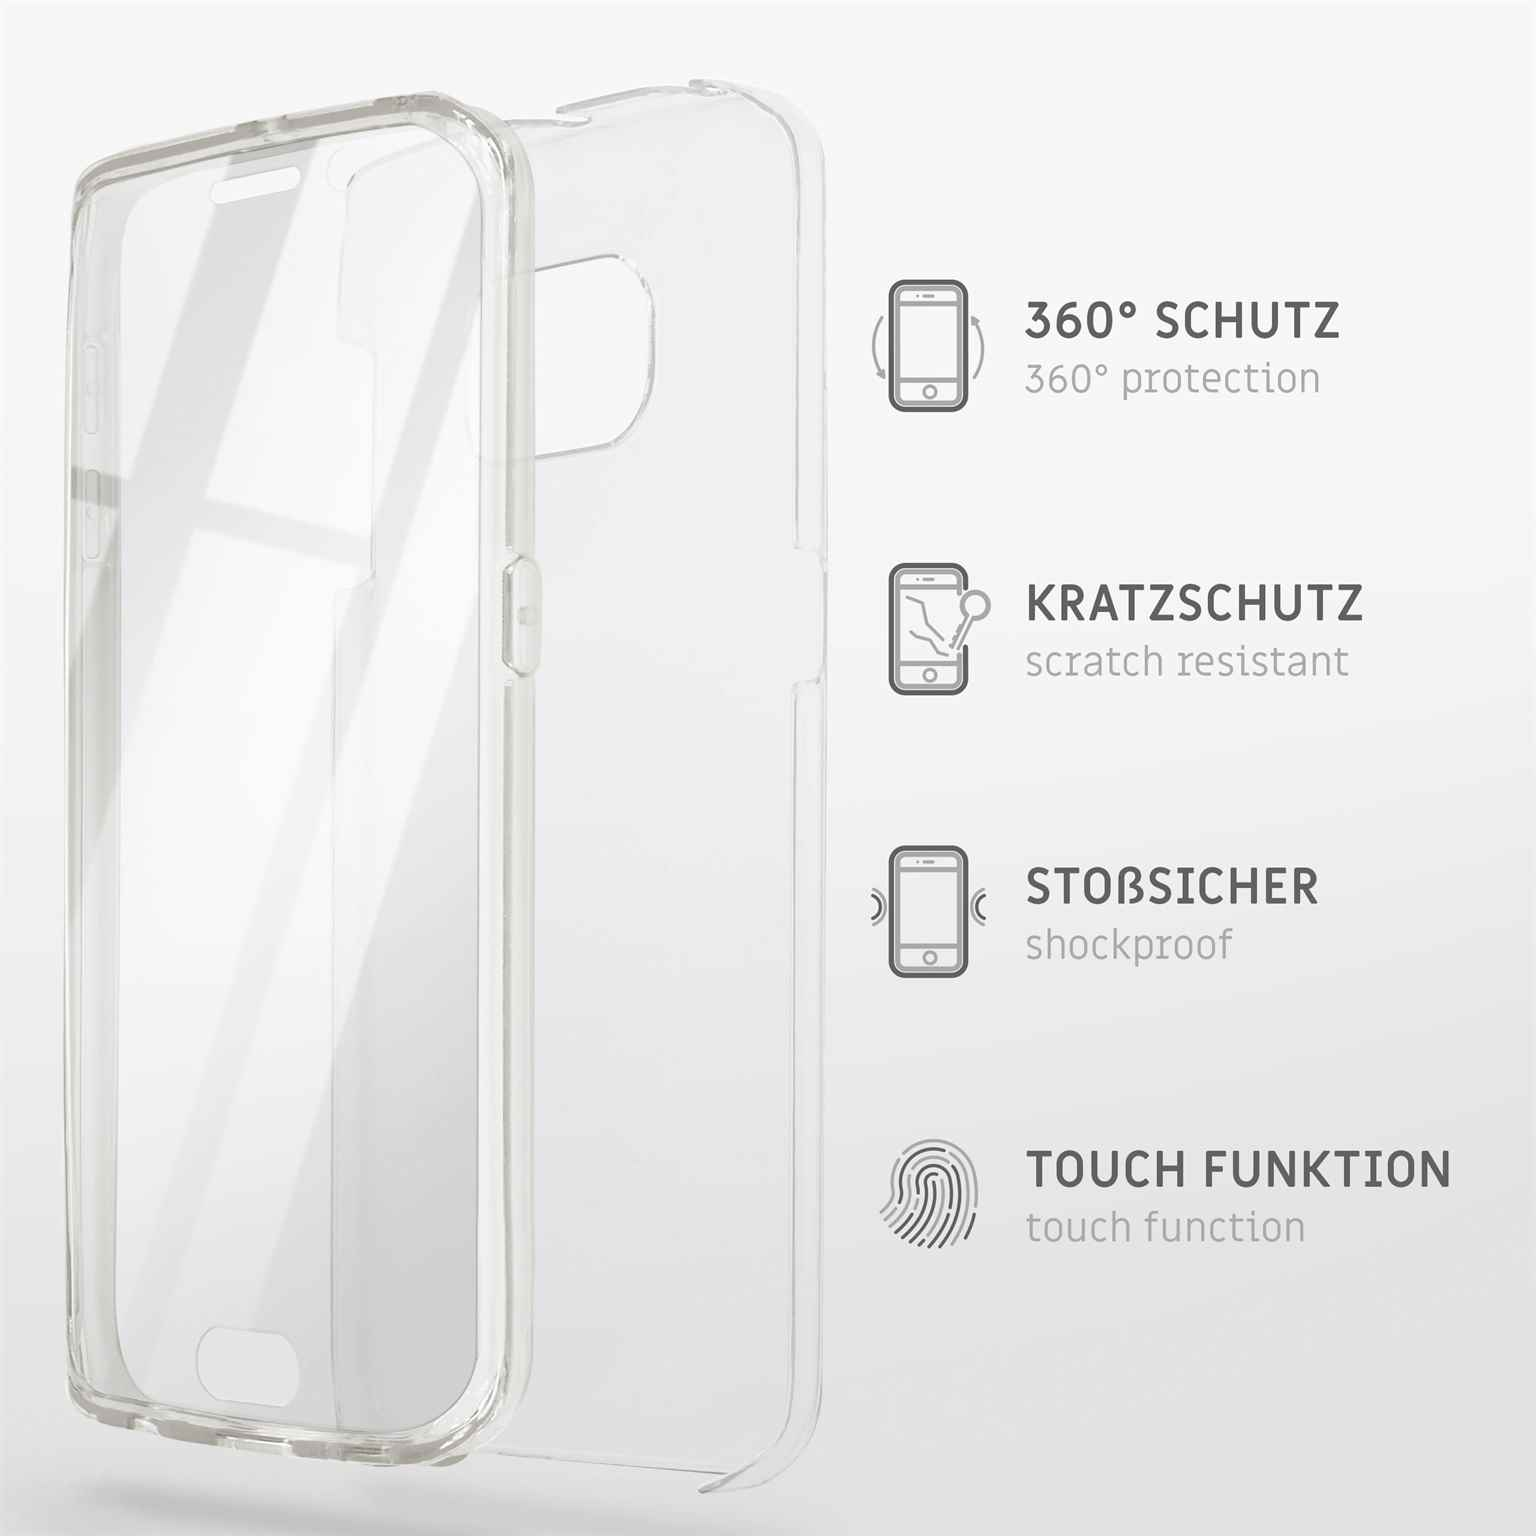 ONEFLOW Touch Case, Full Cover, Galaxy Samsung, S6, Ultra-Clear